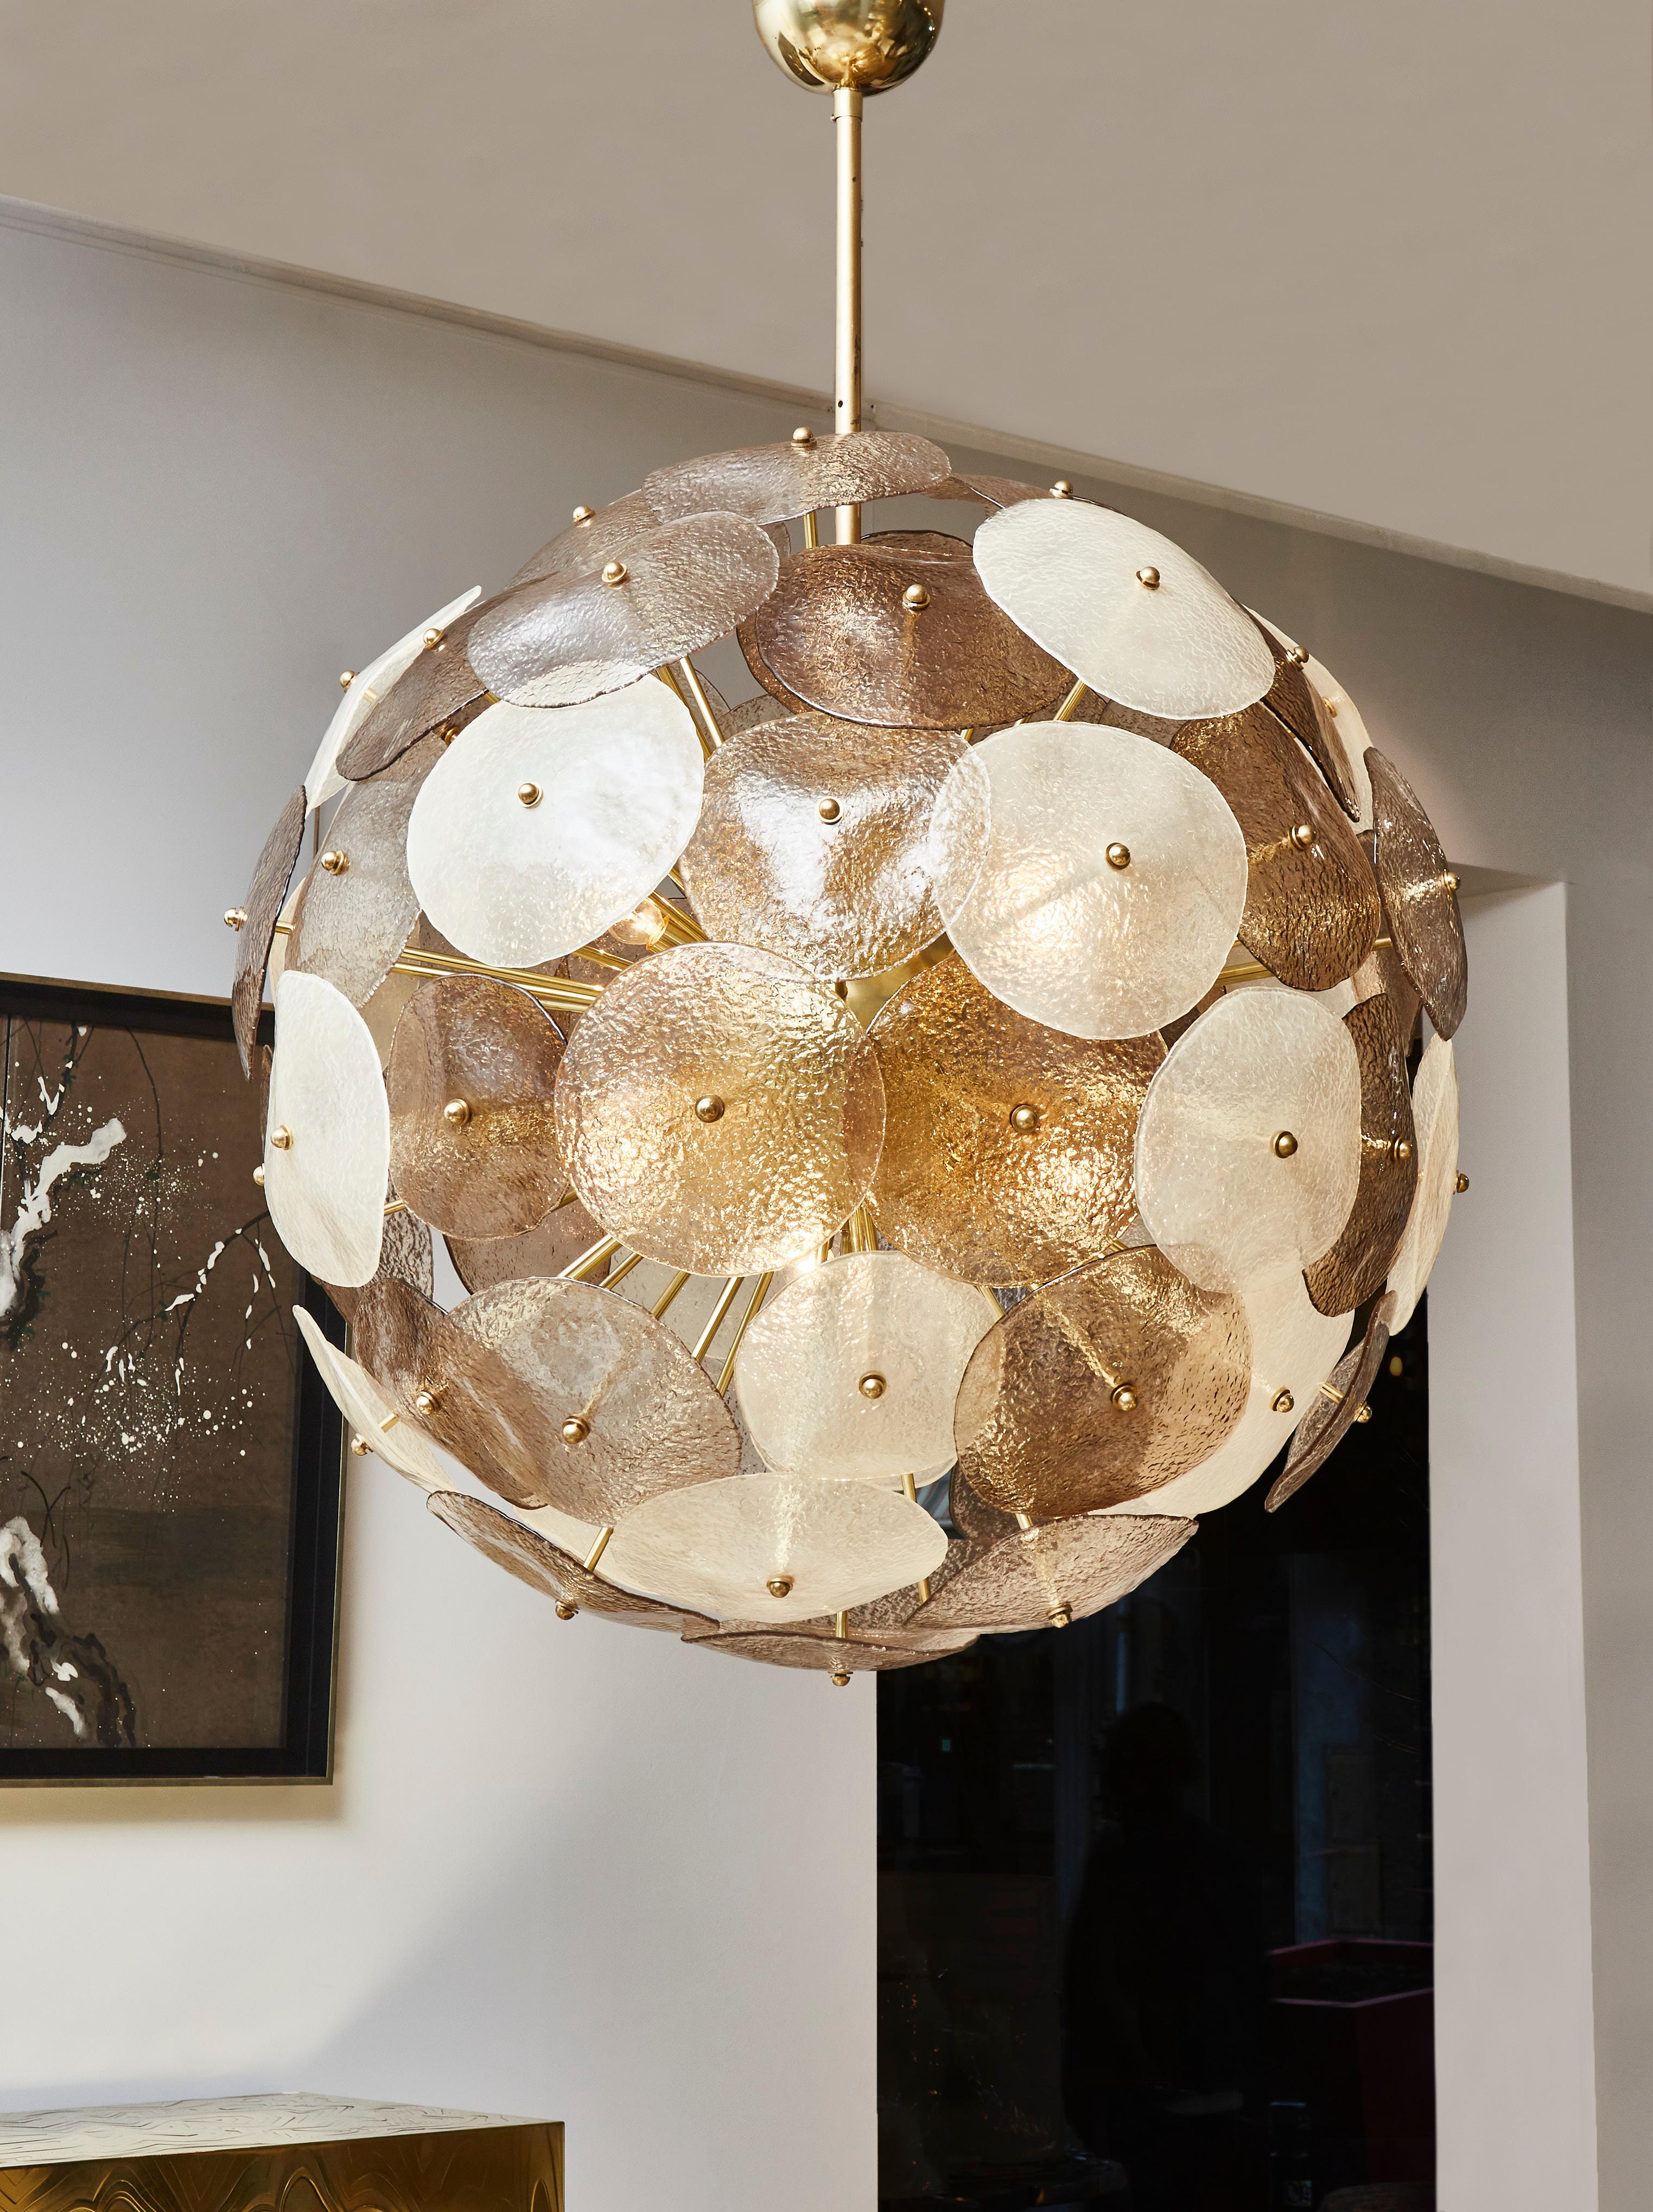 Superb sputnik chandelier in brass with sculpted and smoked Murano glass plates.
Creation by Studio Glustin.
Italy, 2021.